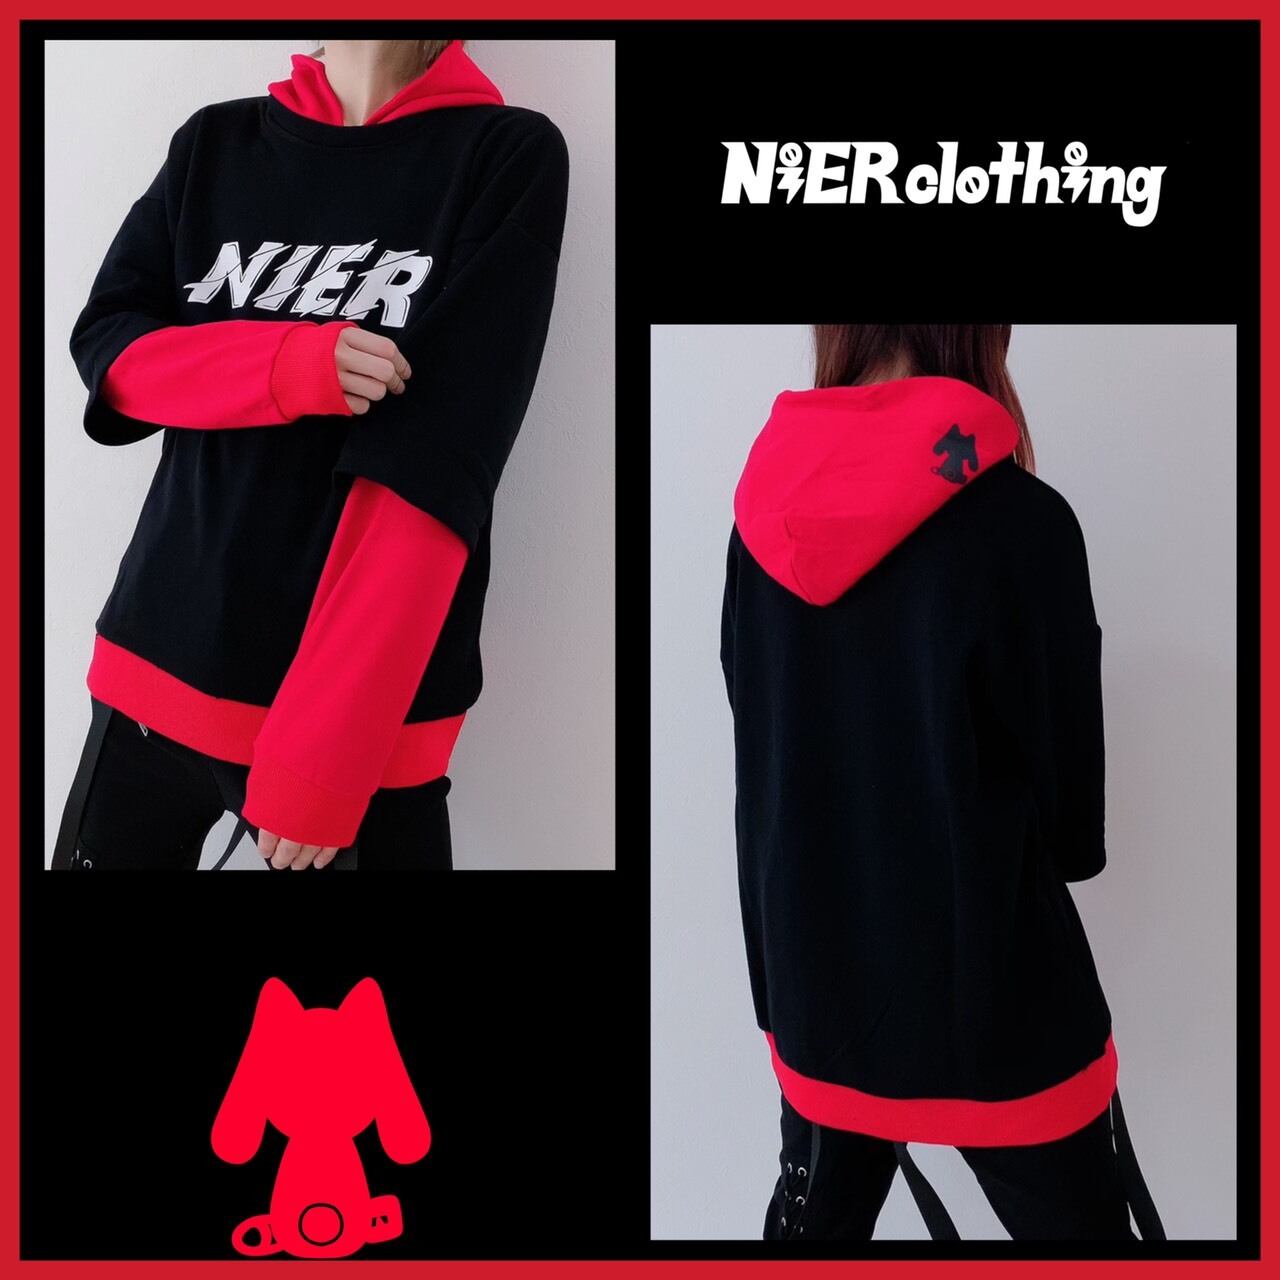 LONG SLEEVE LAYERED HOODIE【BLACK×RED】 | NIER CLOTHING powered by BASE